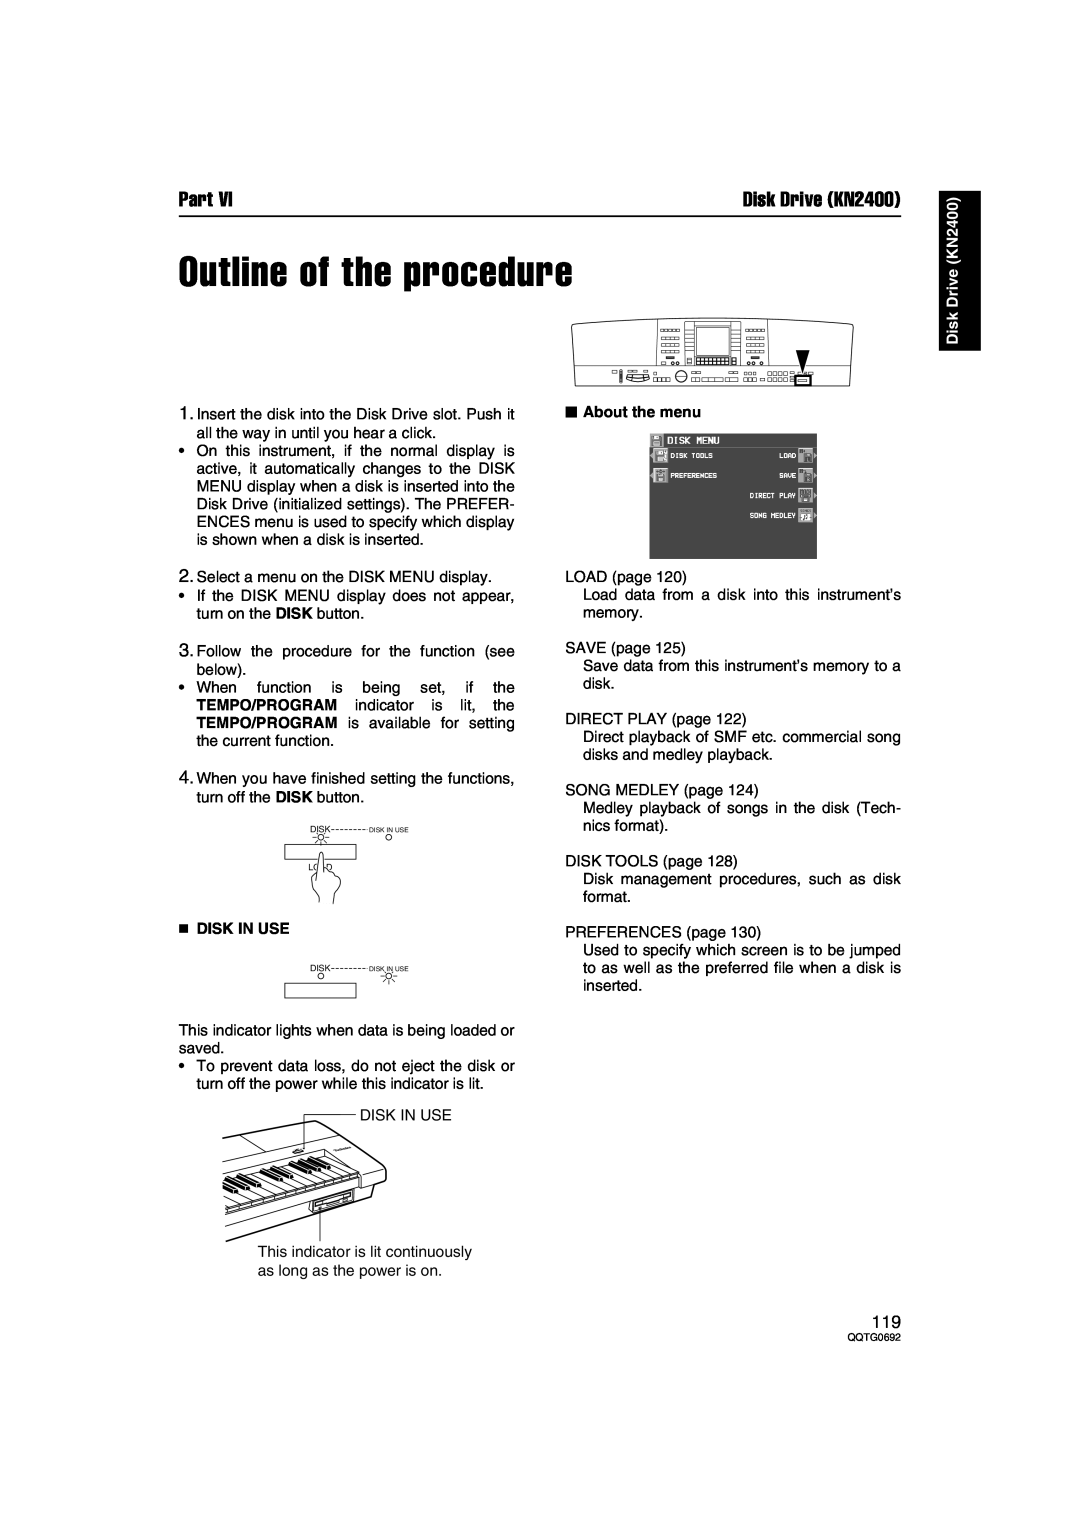 Panasonic SX-KN2400, SX-KN2600 manual Outline of the procedure, Disk In Use, About the menu, Part, Disk Drive KN2400 